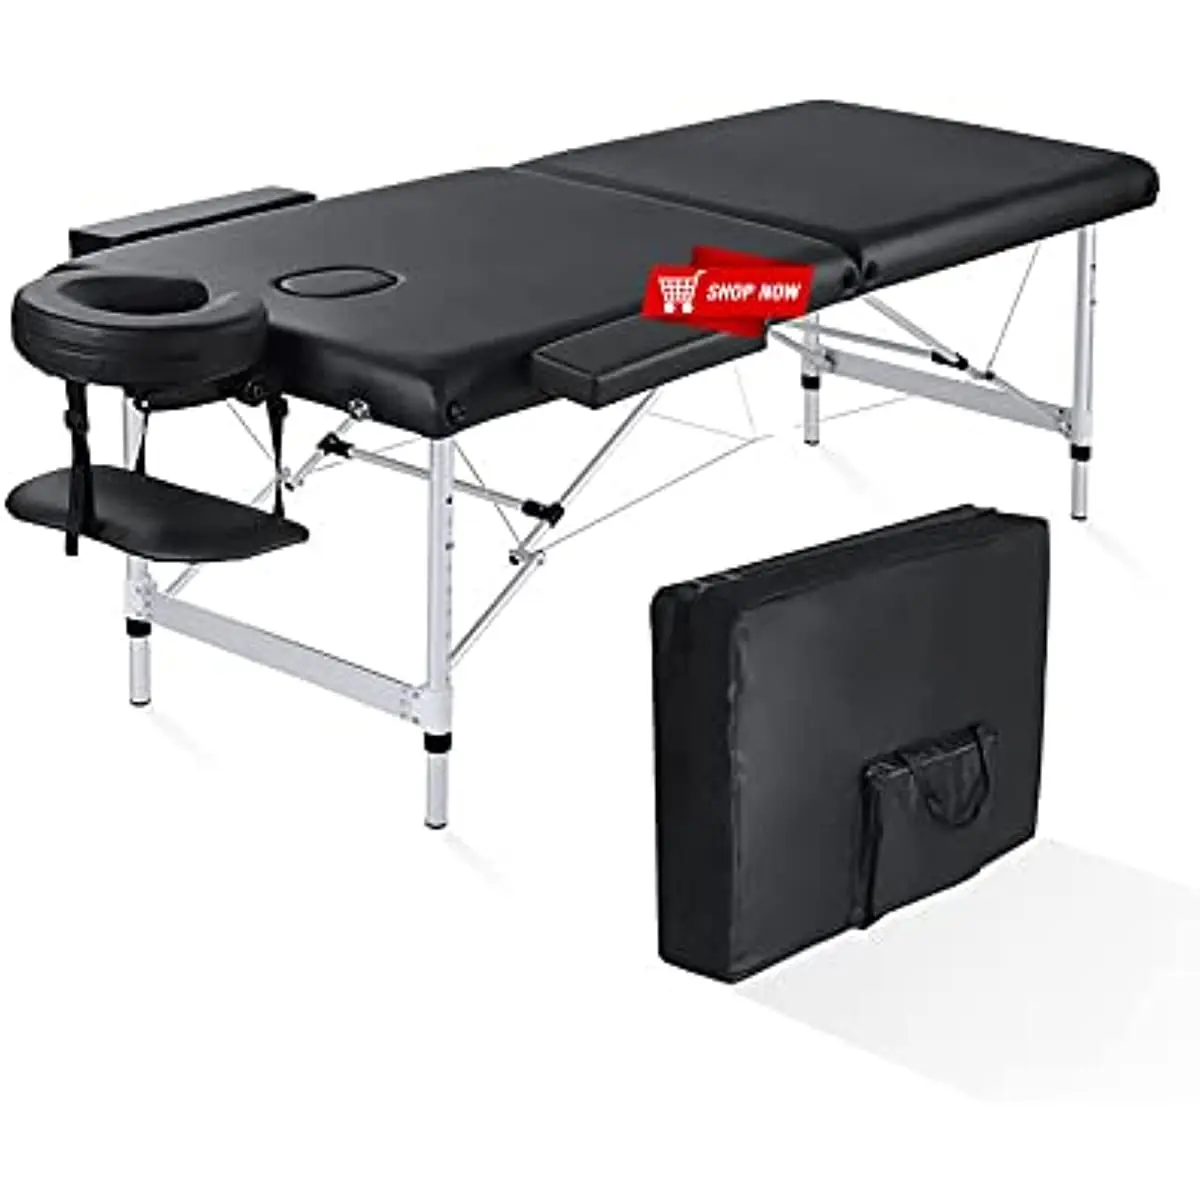 

Massage Bed Lash Bed Facial Table SPA Beds Reiki Table or Esthetician Portable Height Adjustable Carrying Bag & Accessories